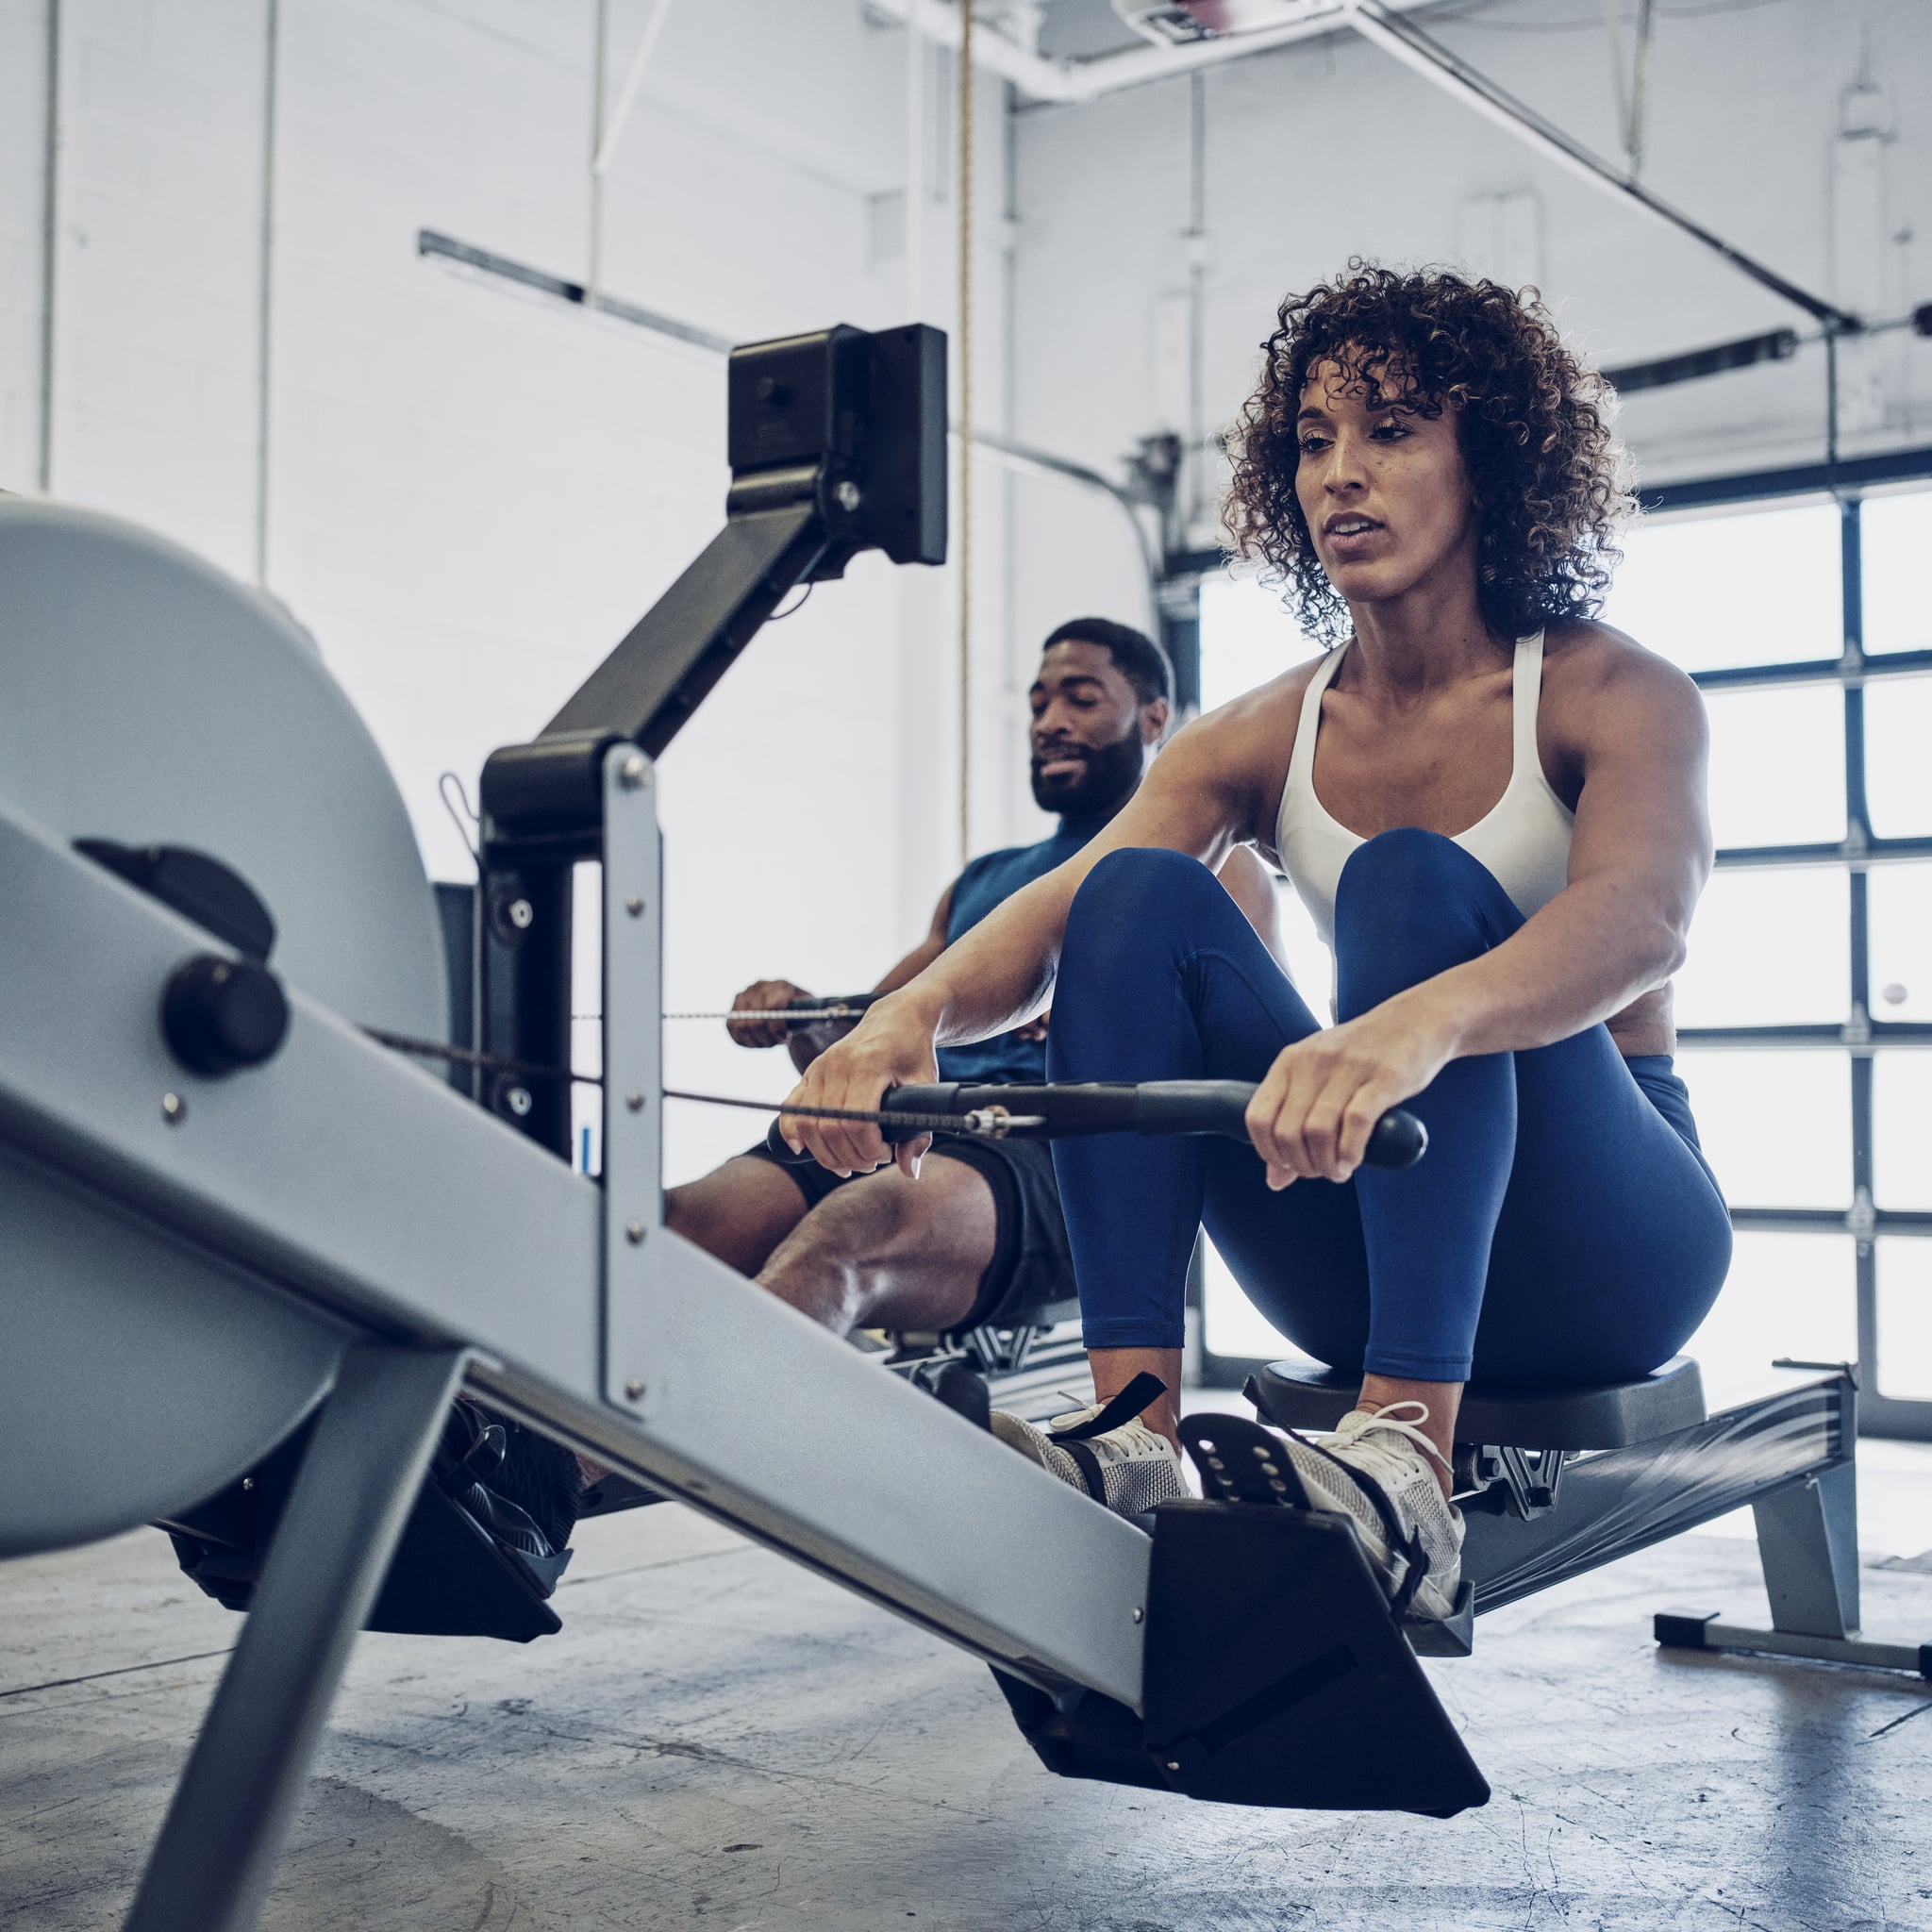 how to, 7 benefits of a rowing machine, plus how to row with proper form